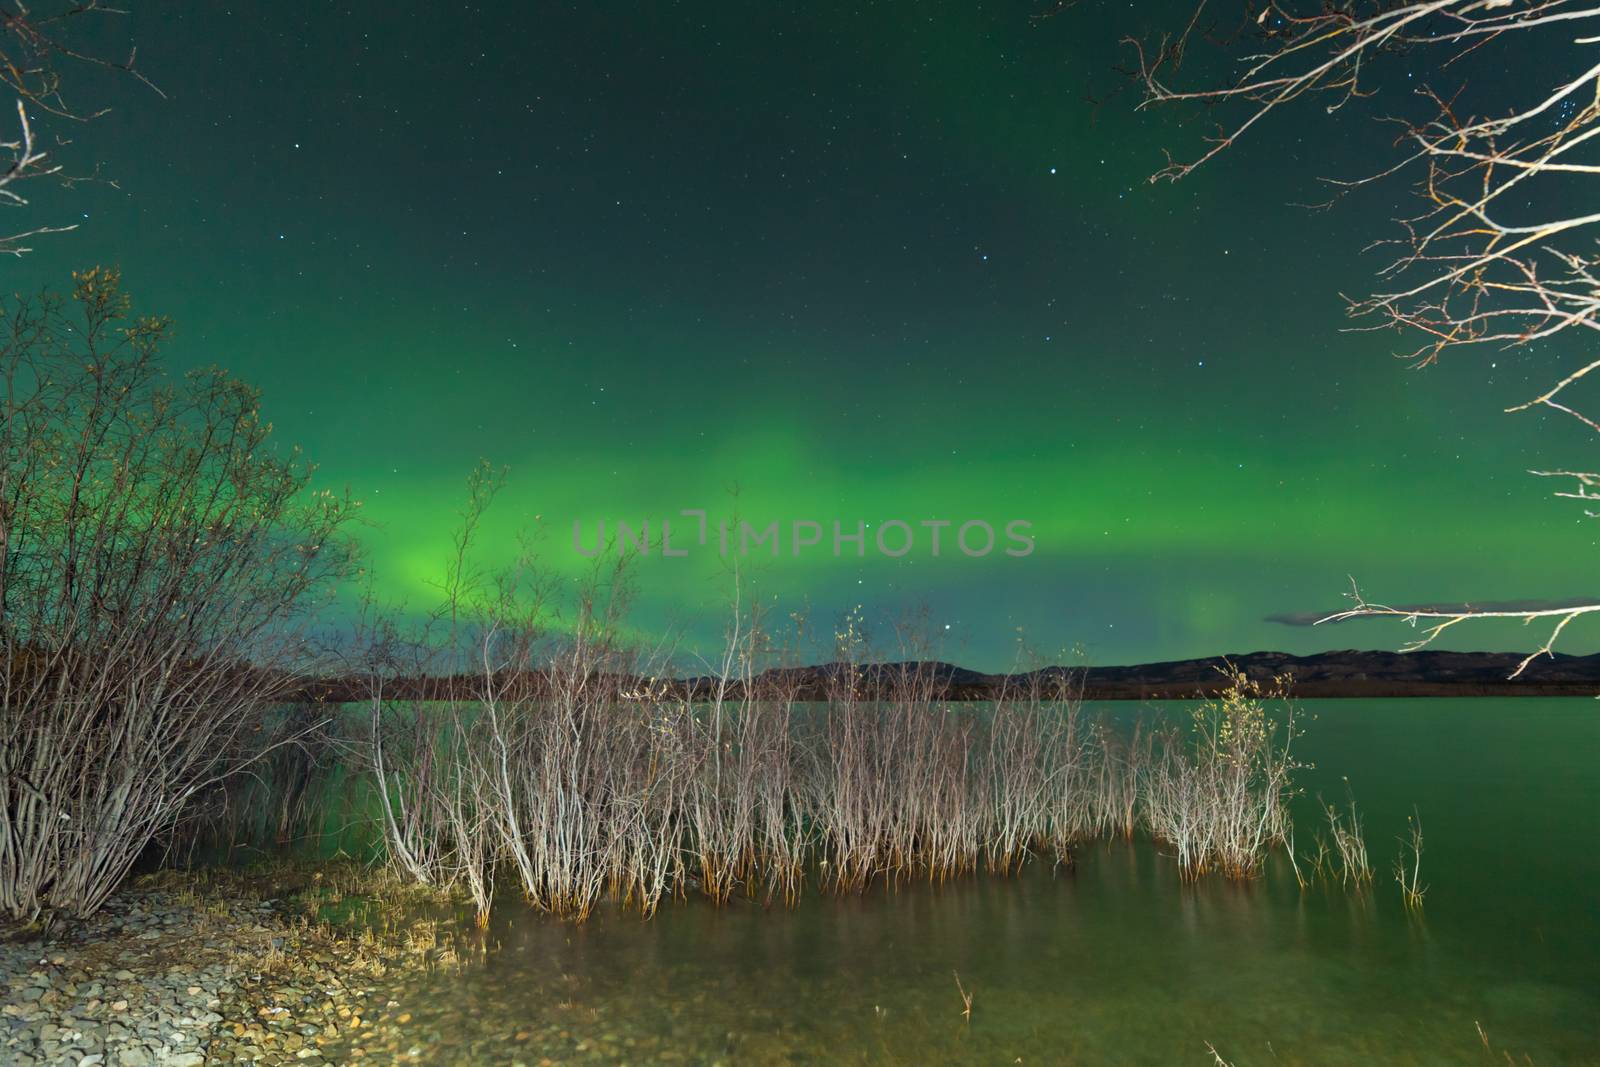 Sparkling green starry night sky show of Aurora borealis or Northern Lights over shore willow bush at Lake Laberge, Yukon Territory, Canada